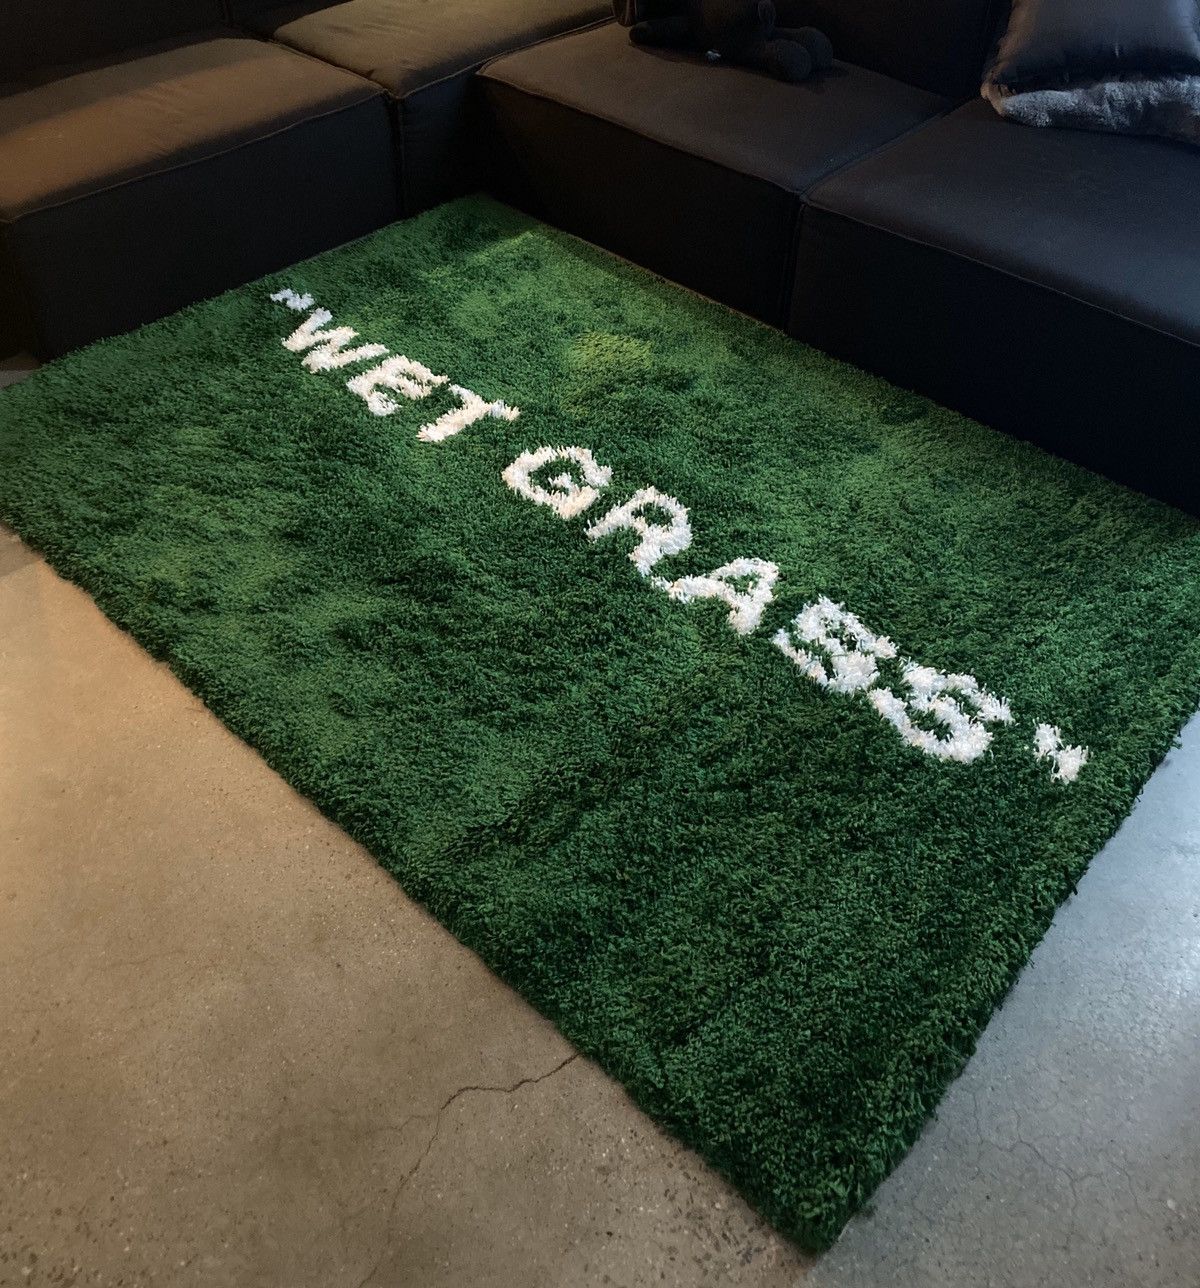 Stylishly Incorporate the Ikea x Virgil Abloh 'Wet Grass' Rug